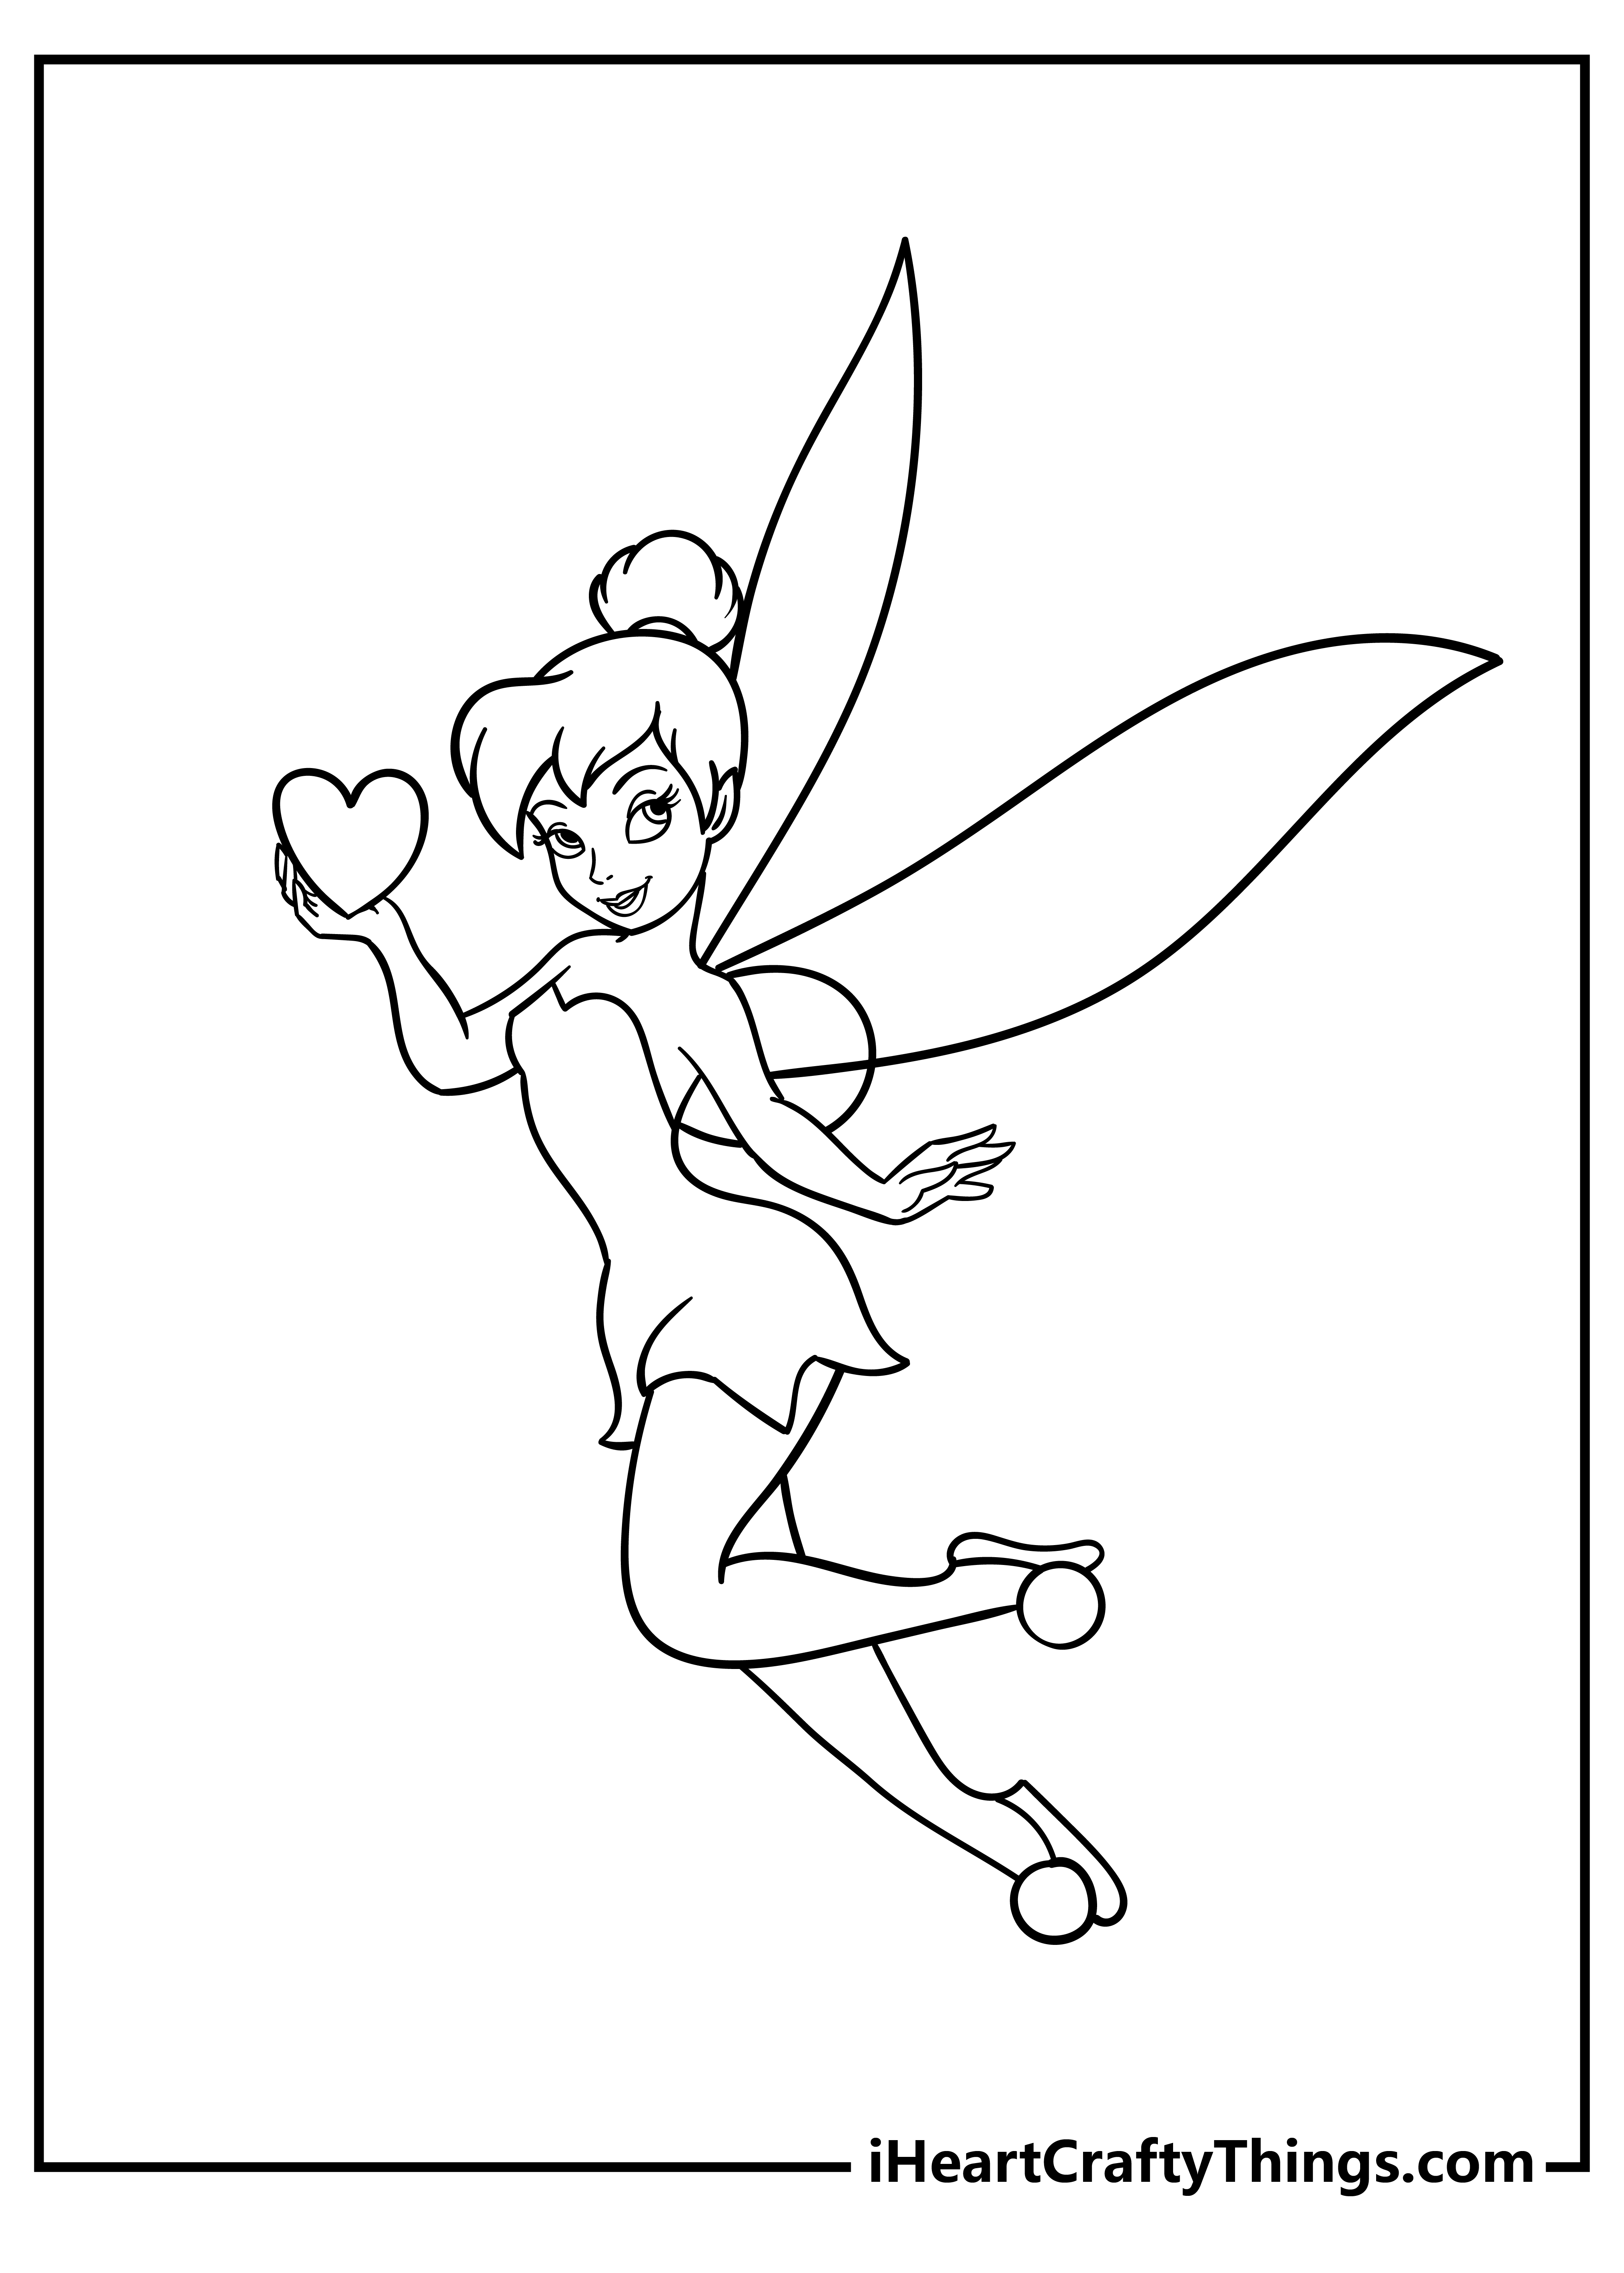 Tinkerbell Coloring Sheet for children free download